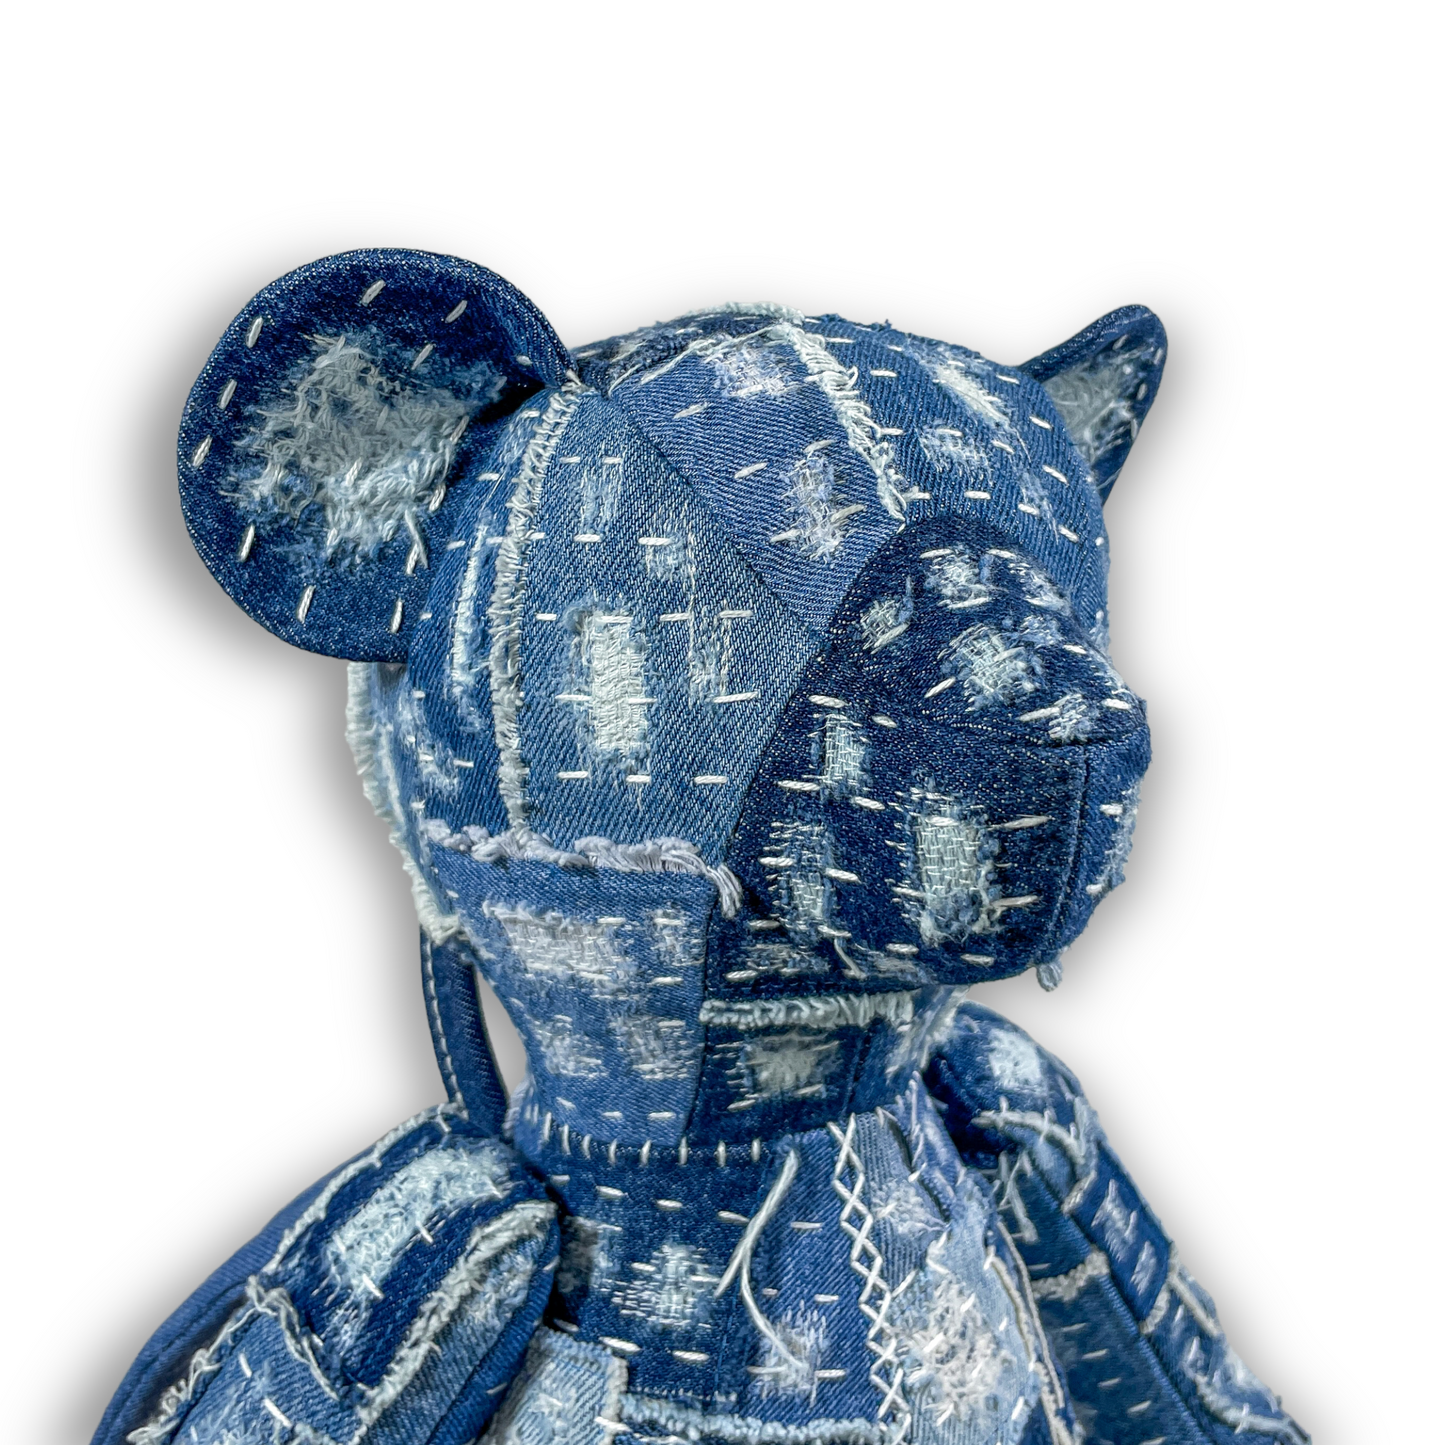 "Pieces of Forever" Bear Backpack 1of1